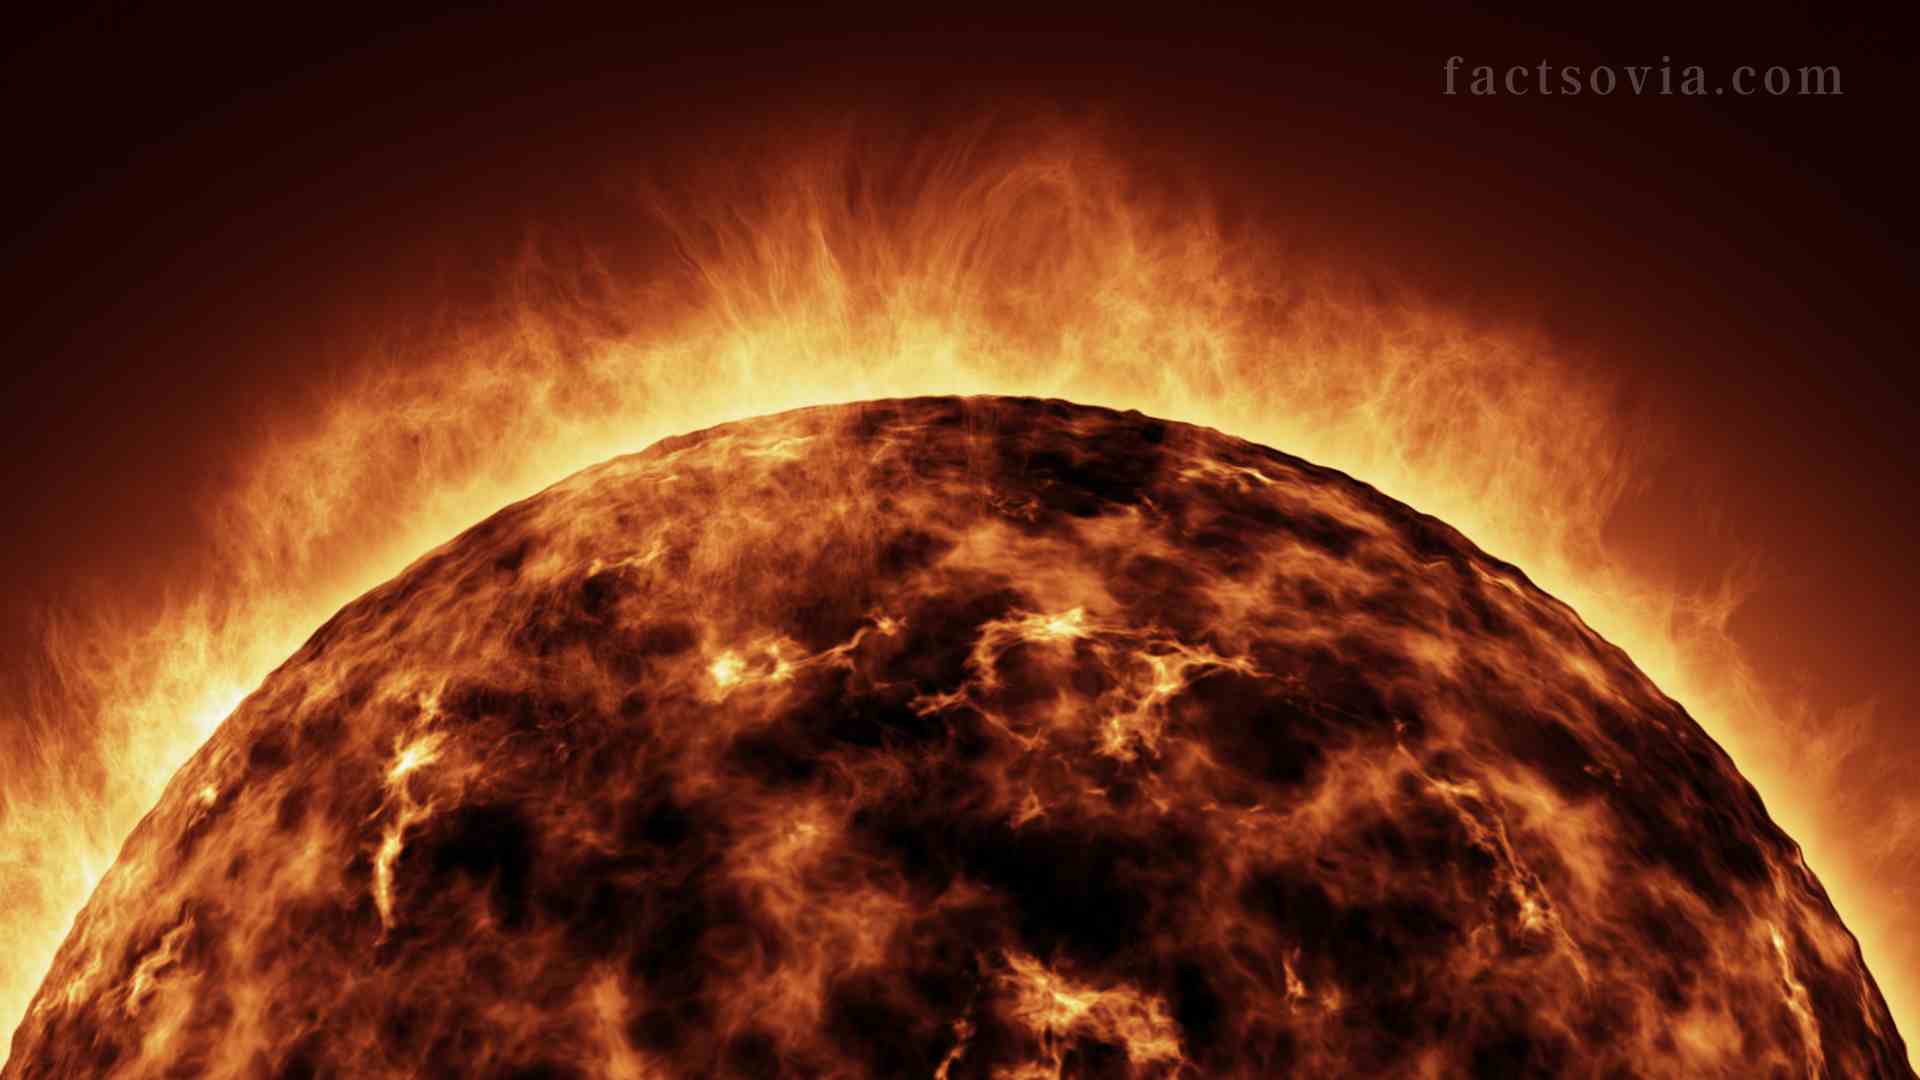 the big surface area of the sun